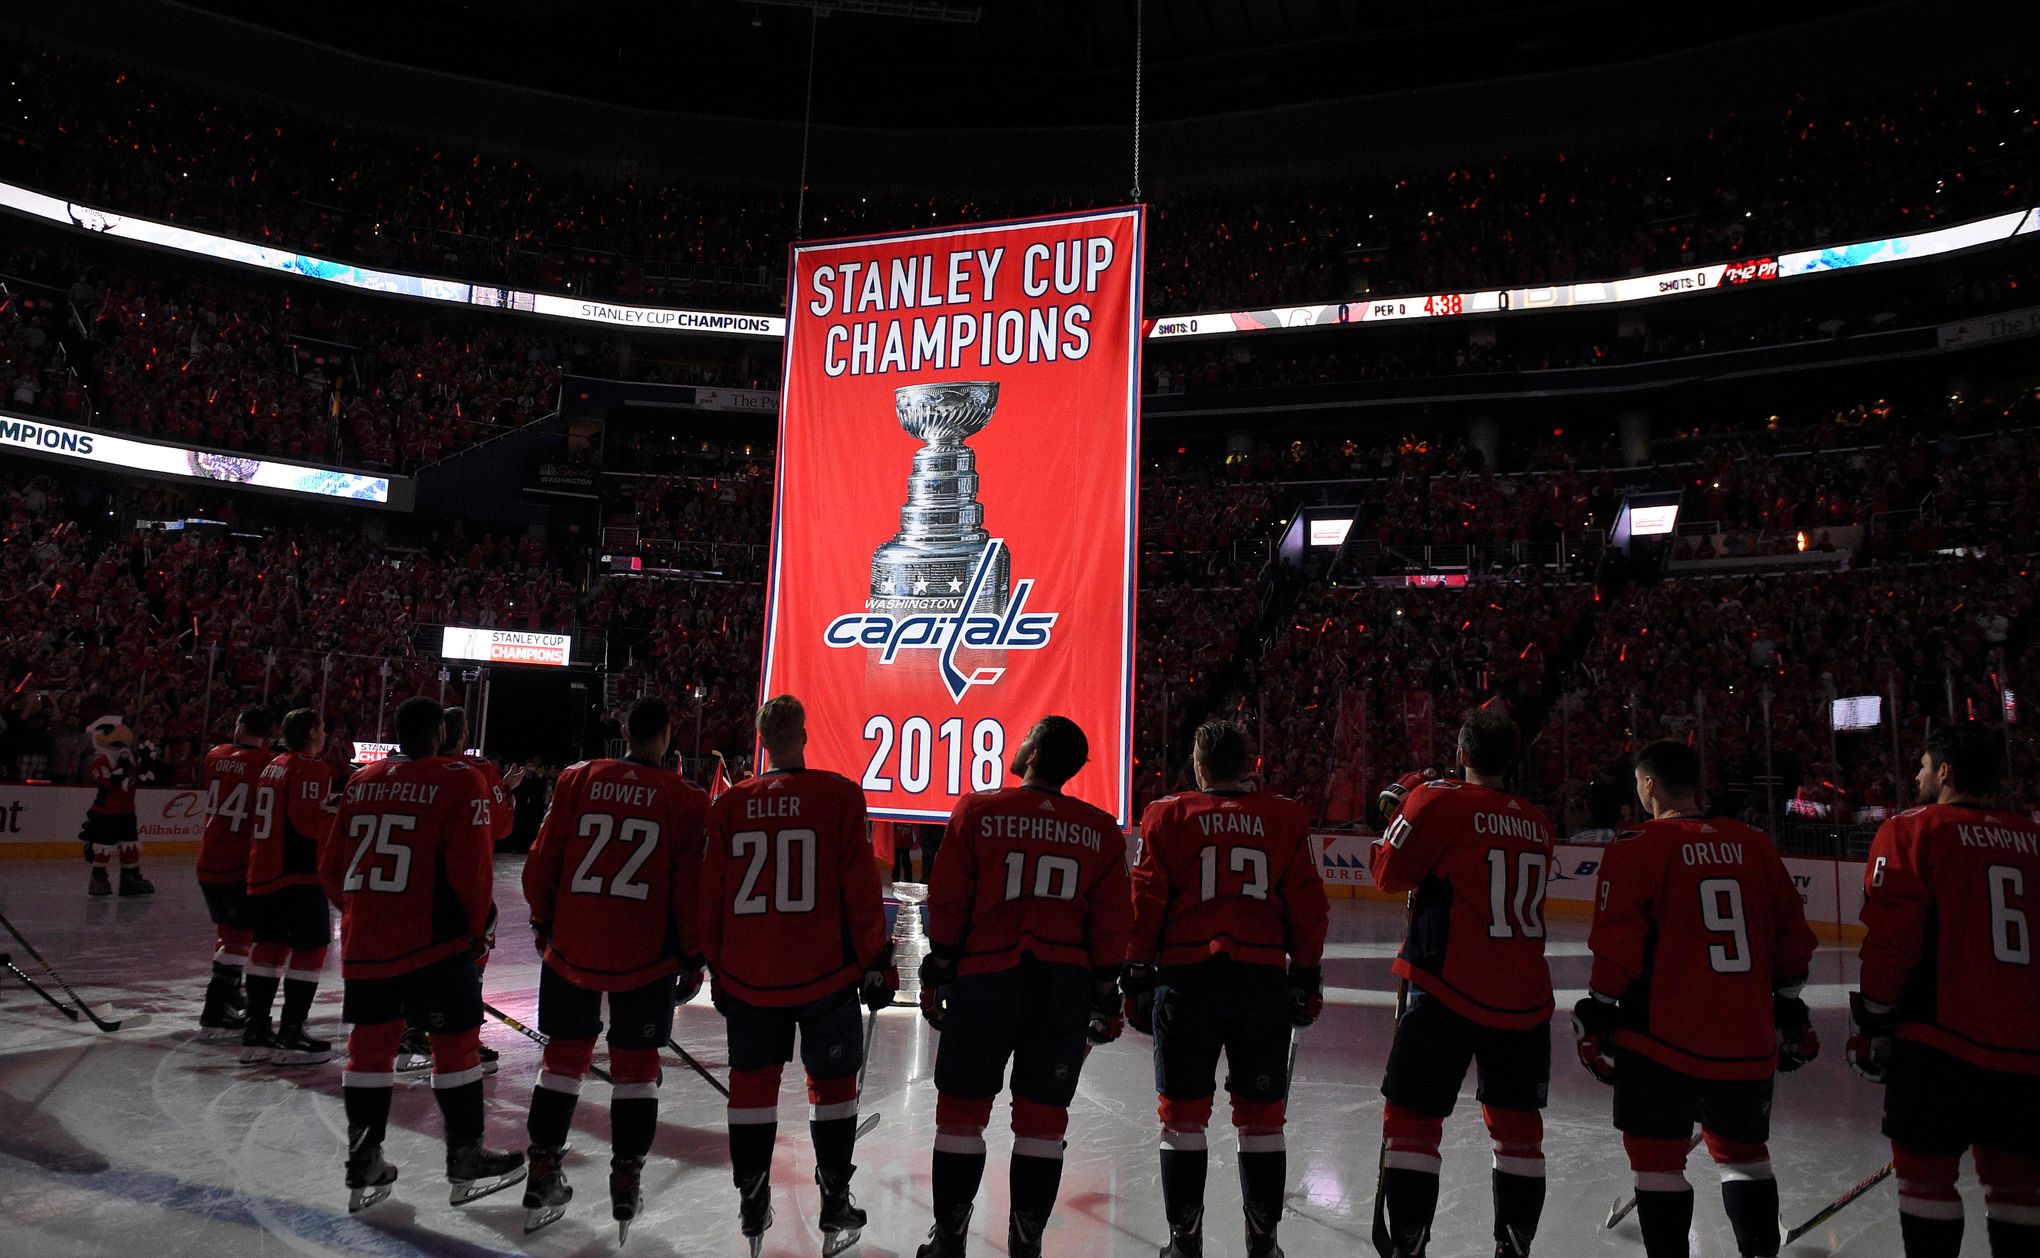 Back-to-back!' Banner night for Ovechkin, Cup champ Caps